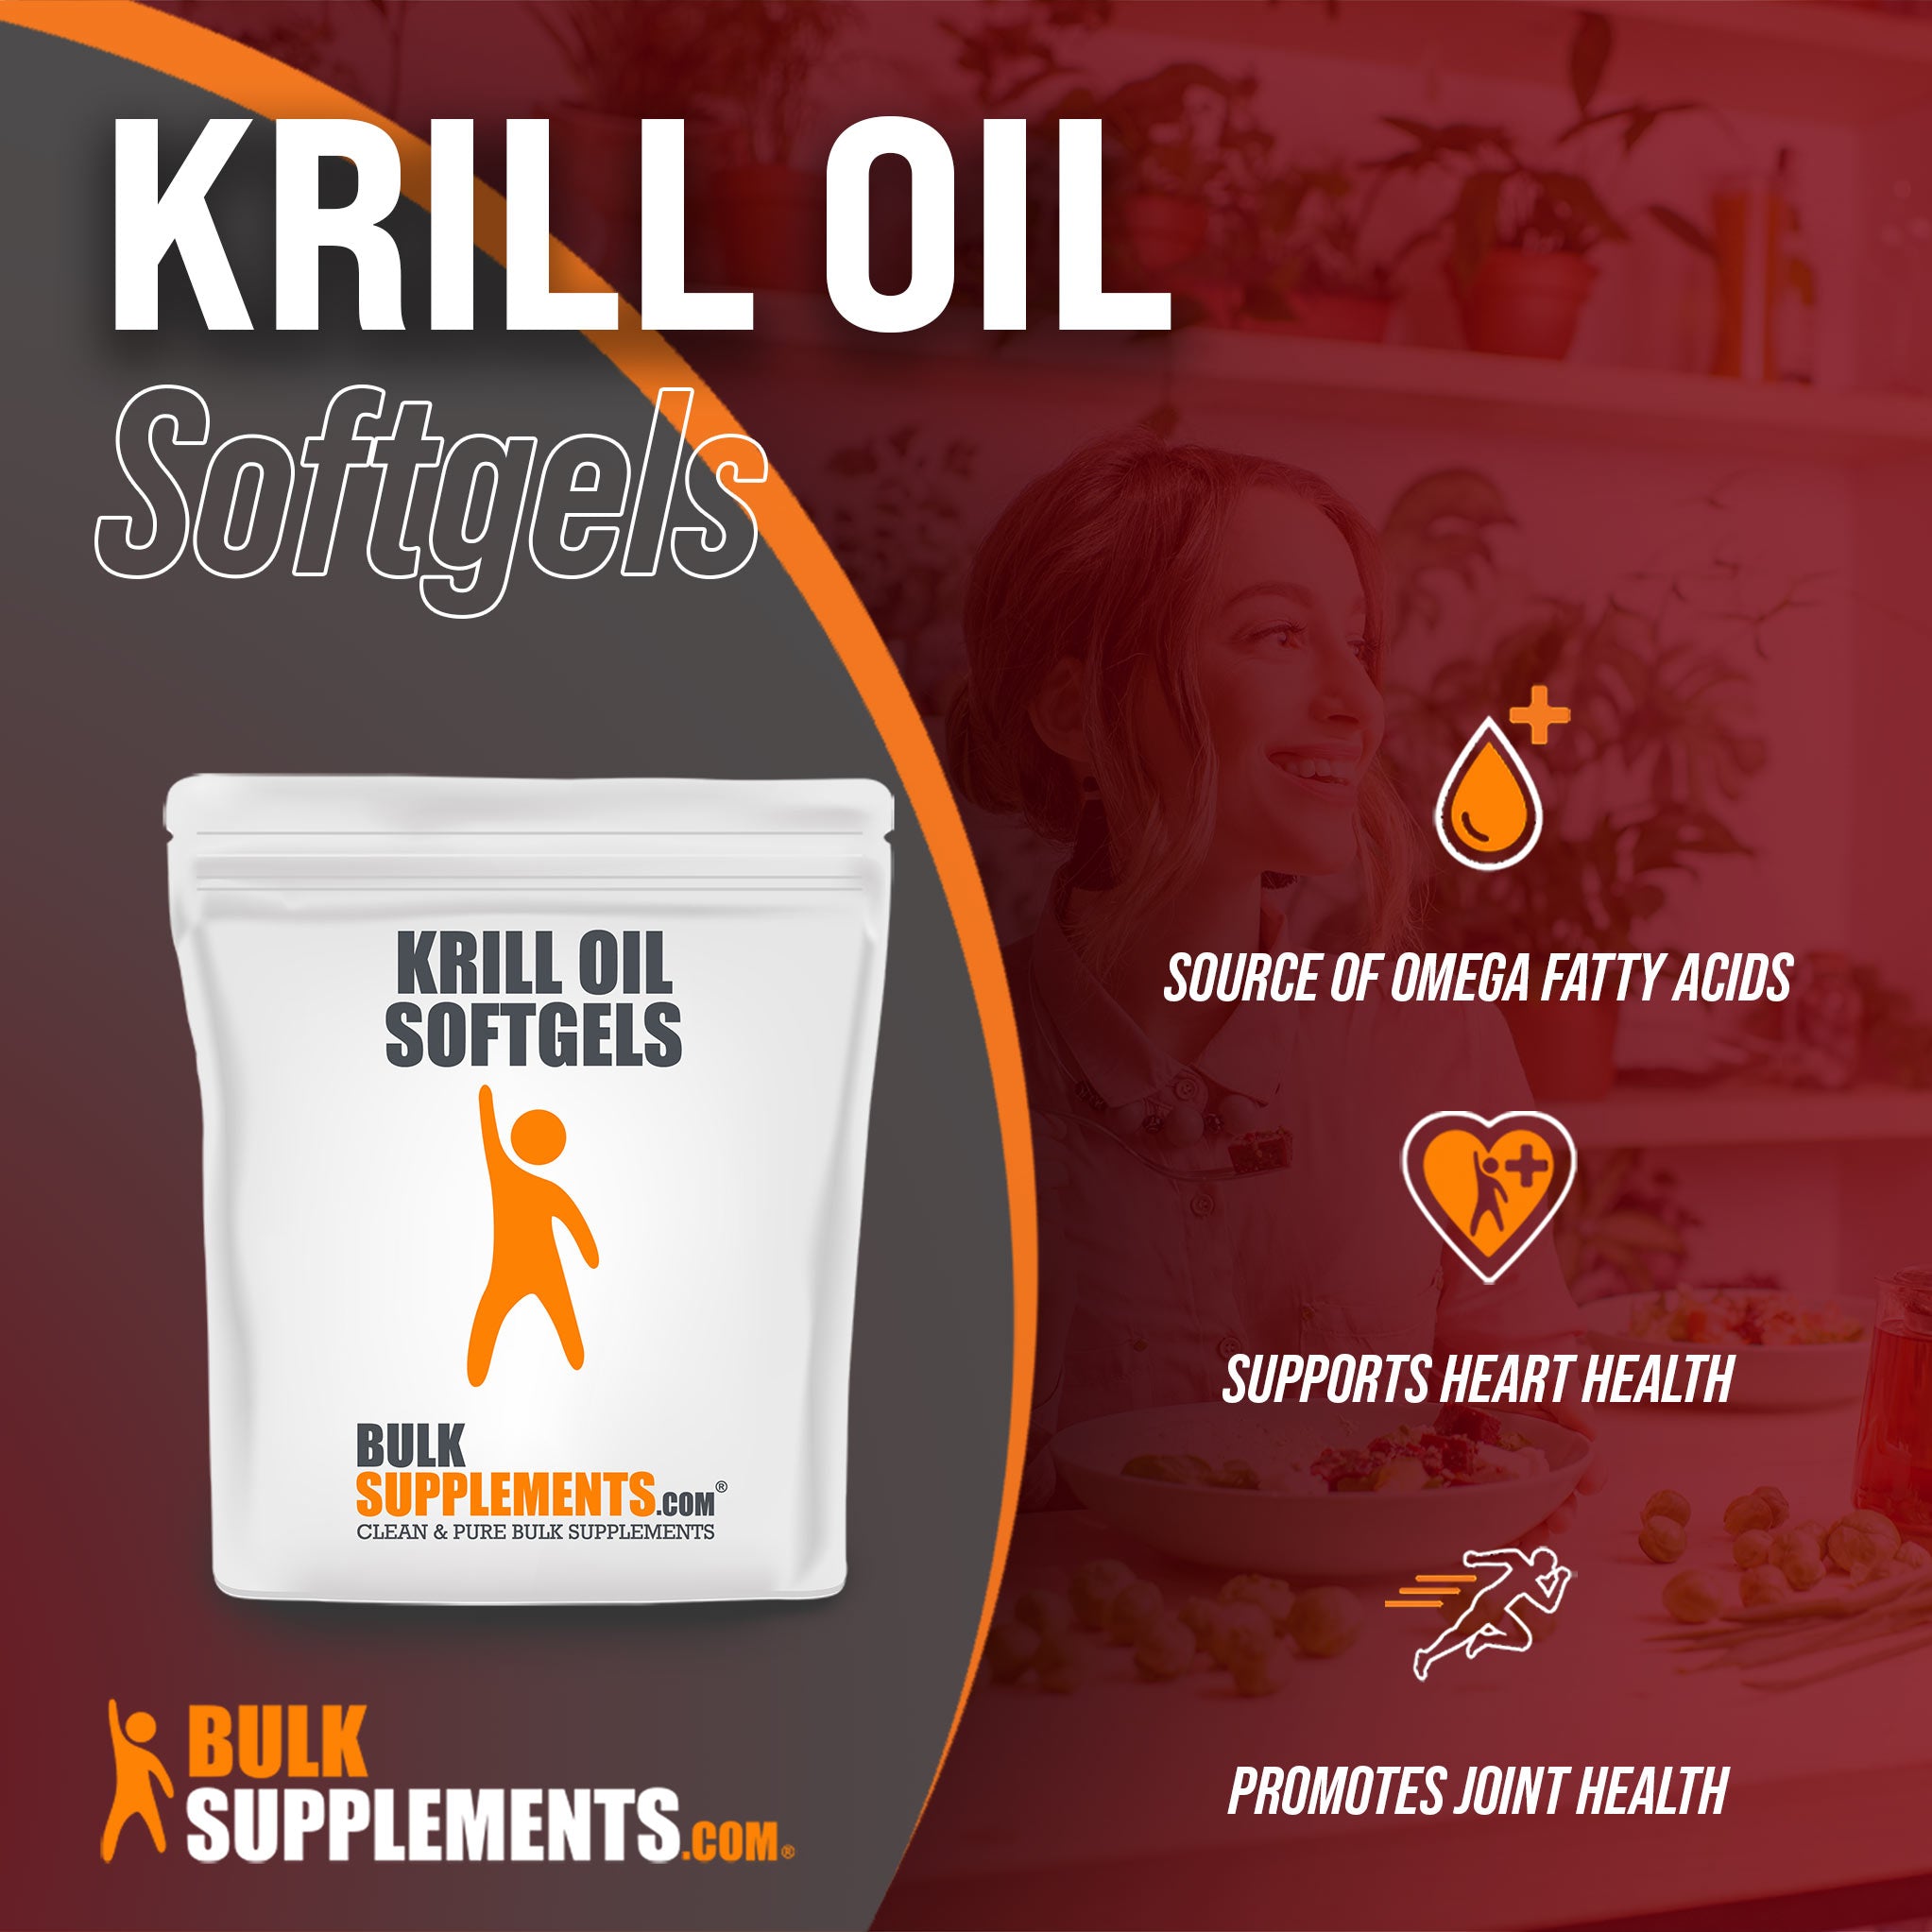 Benefits of Krill Oil Softgels; source of omega fatty acids, supports heart health, promotes joint health